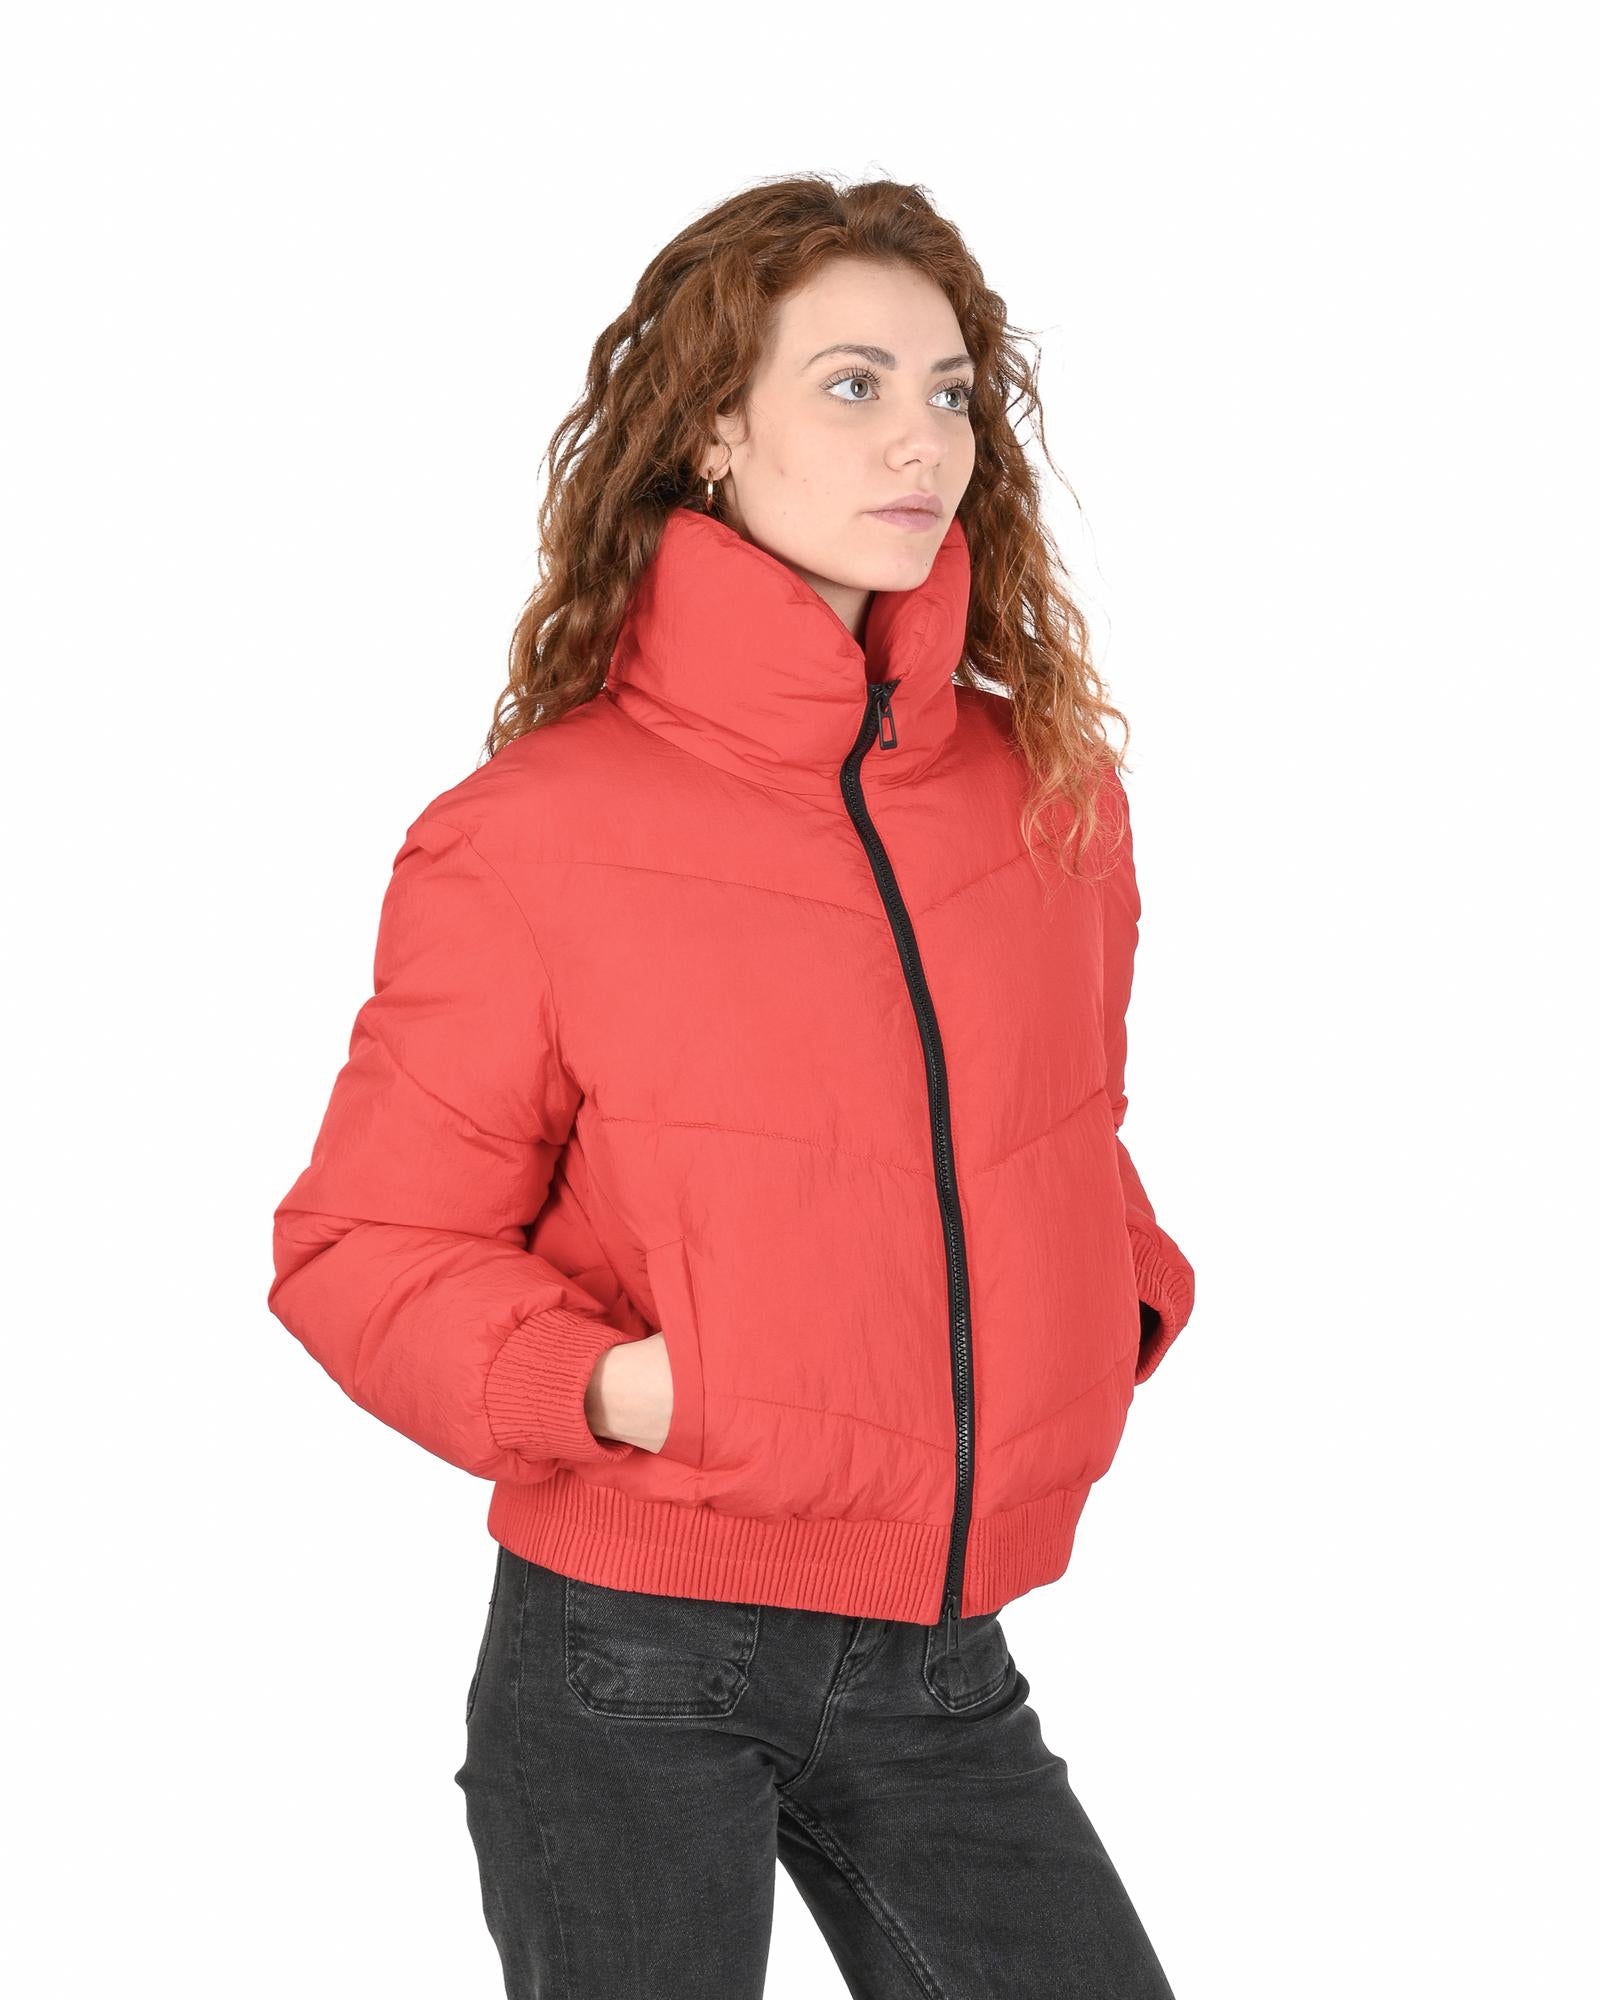 Women's Red Polyamide Jacket in Red - S